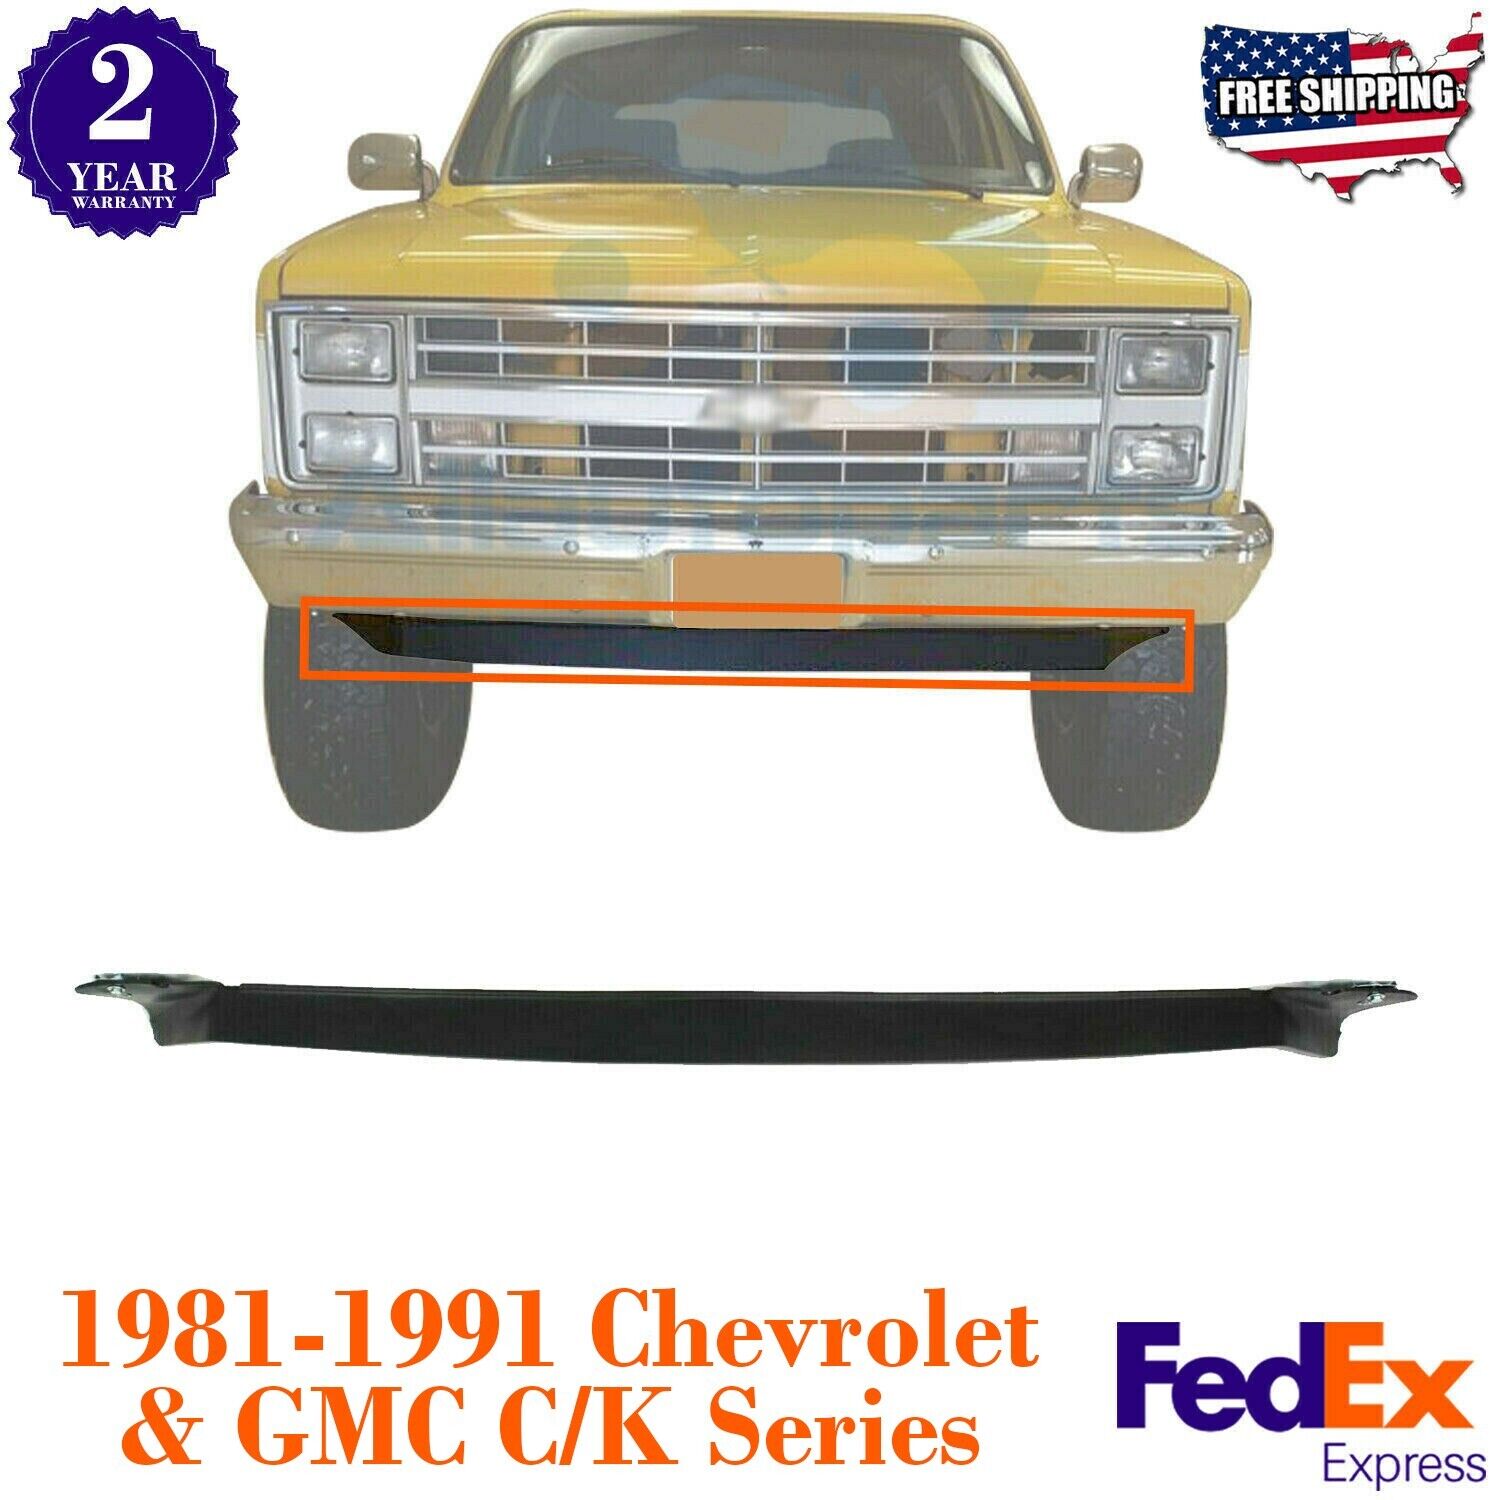 Front Lower Valance Air Deflector For 1981-1991 Chevrolet & GMC C/K /Suburban